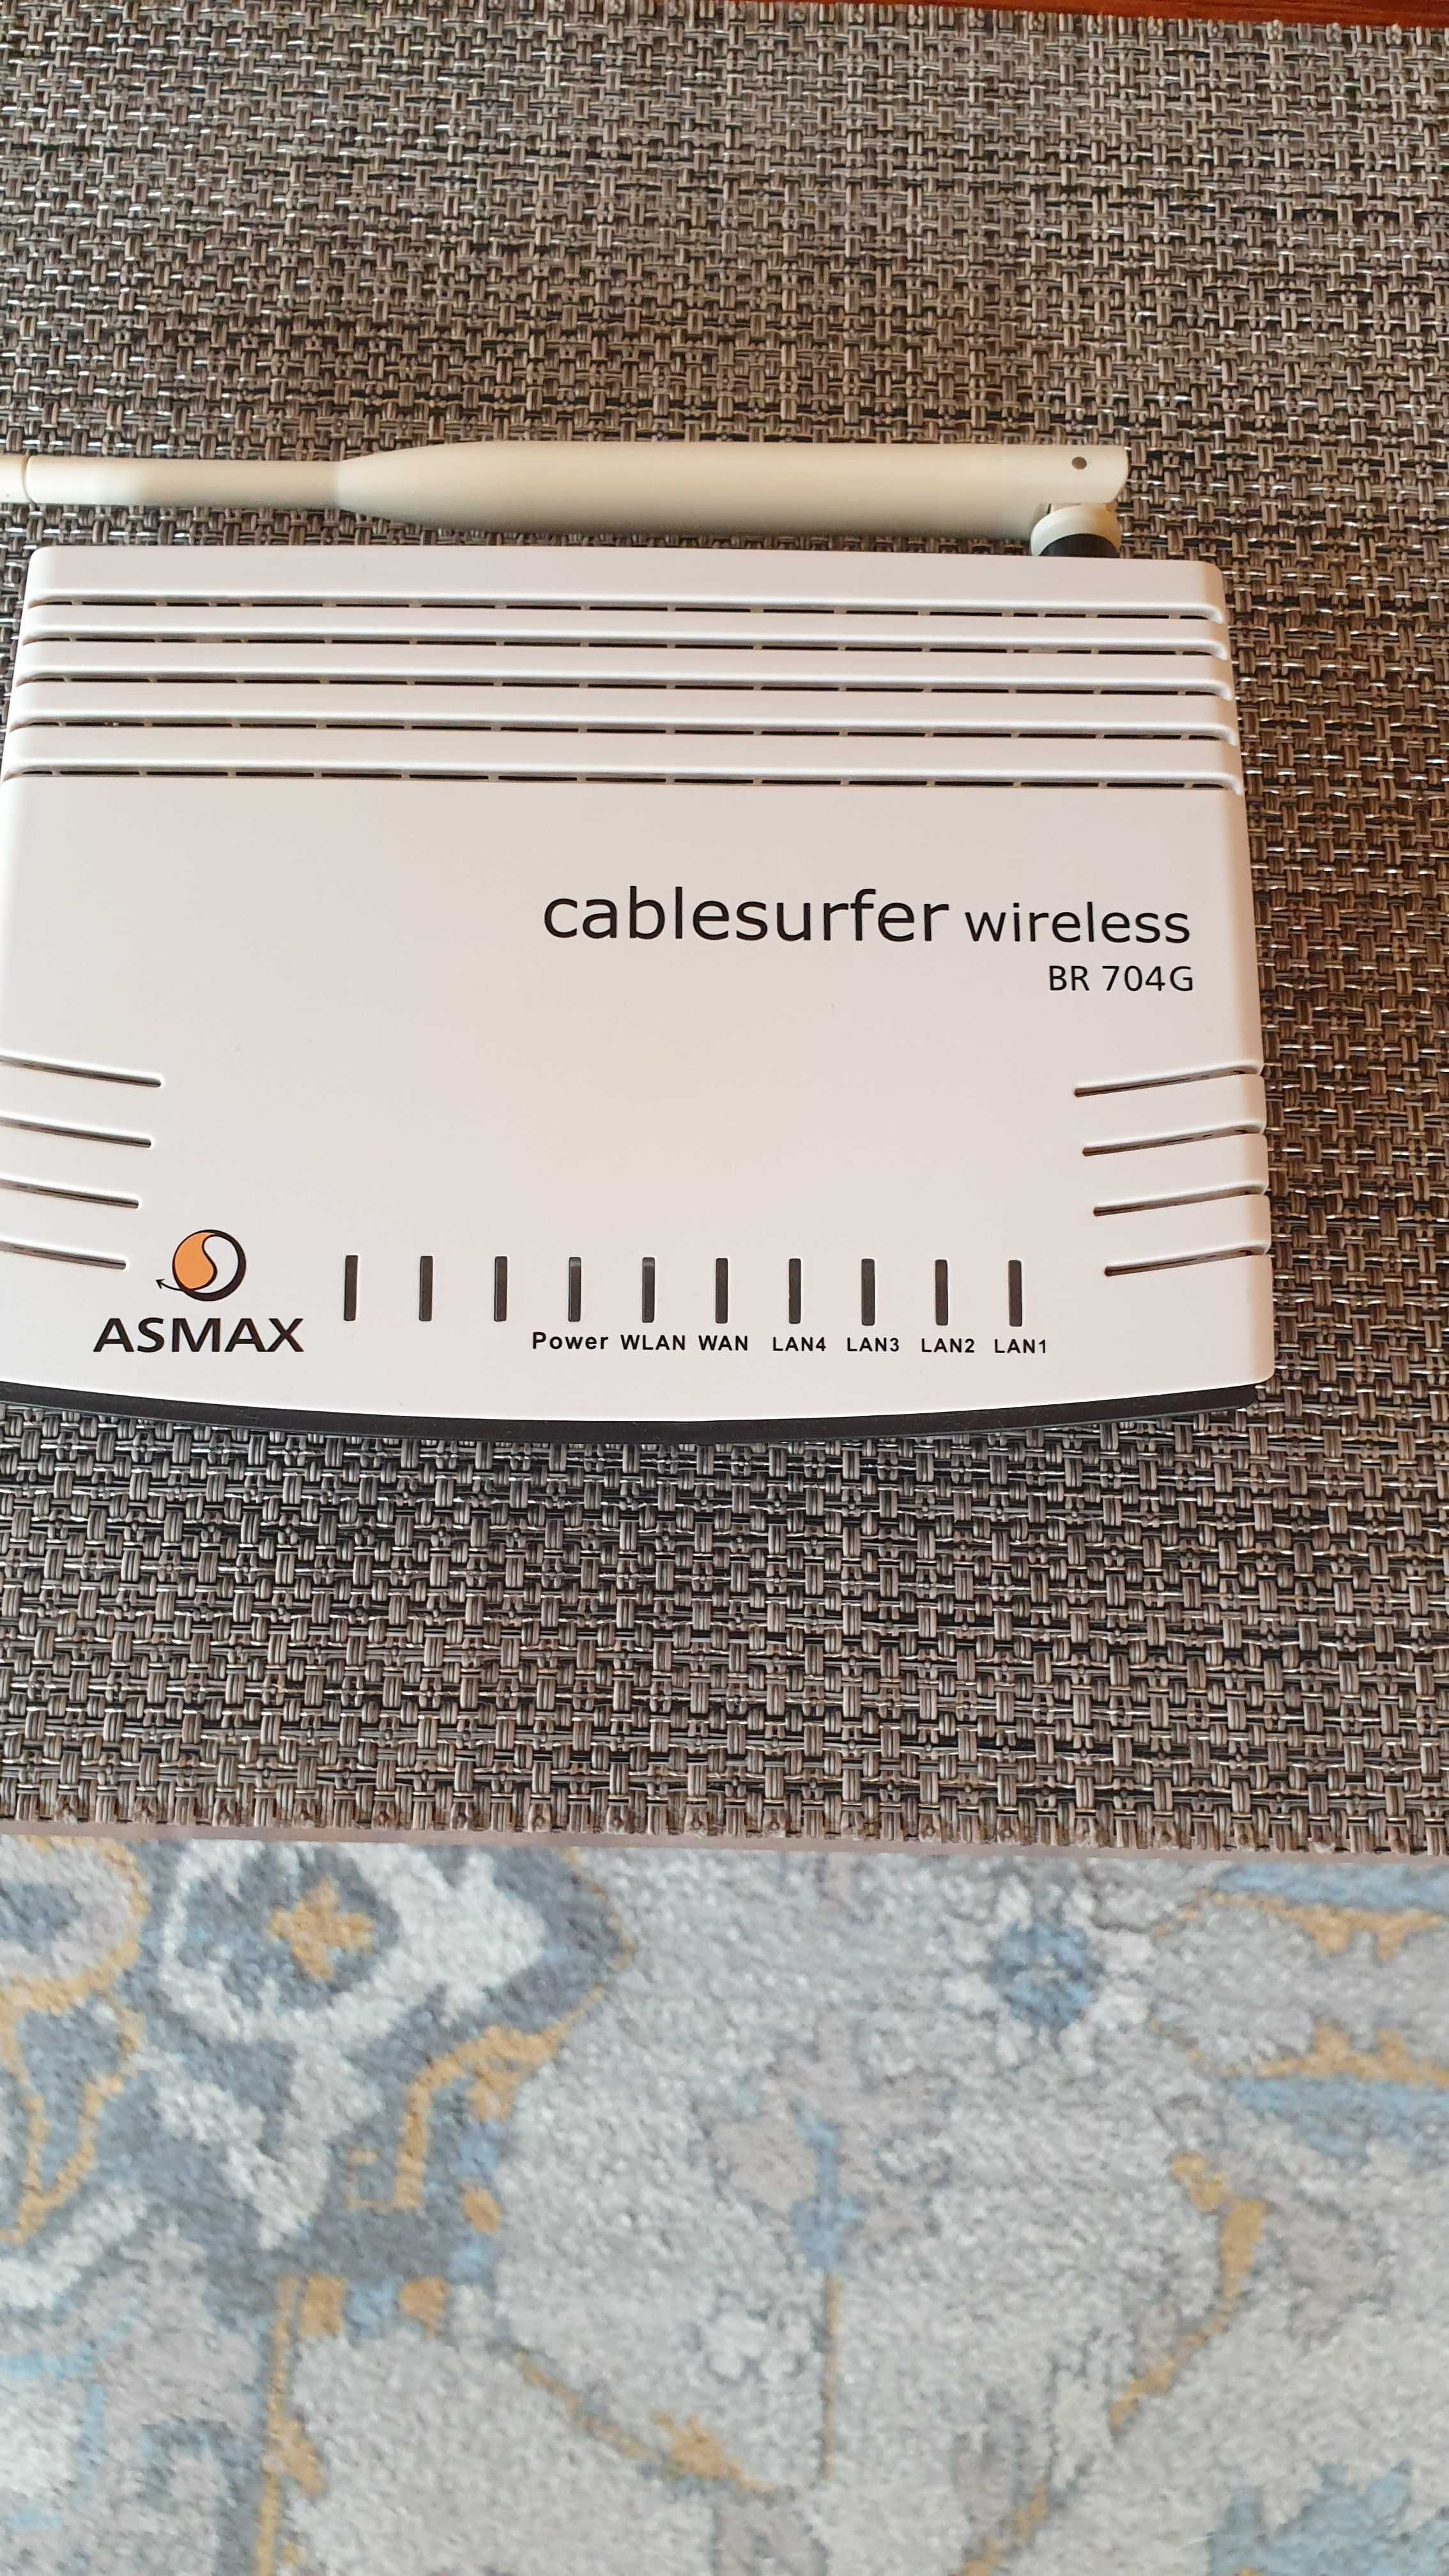 Router BR 704G Cablesurfer wireless